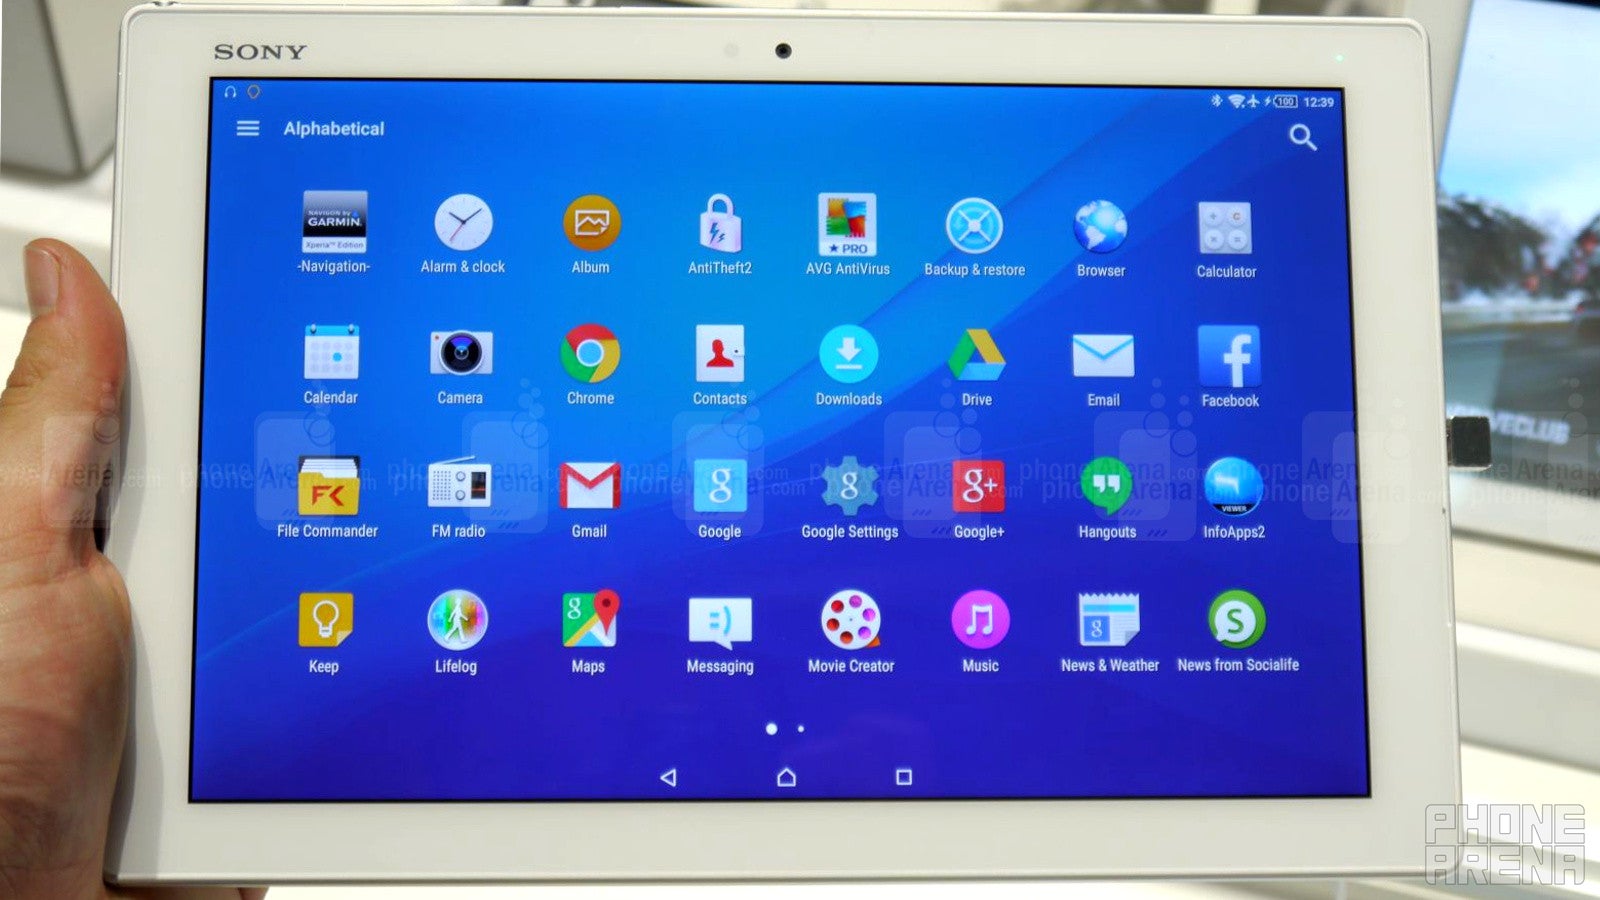 Sony Xperia Z4 Tablet hands-on